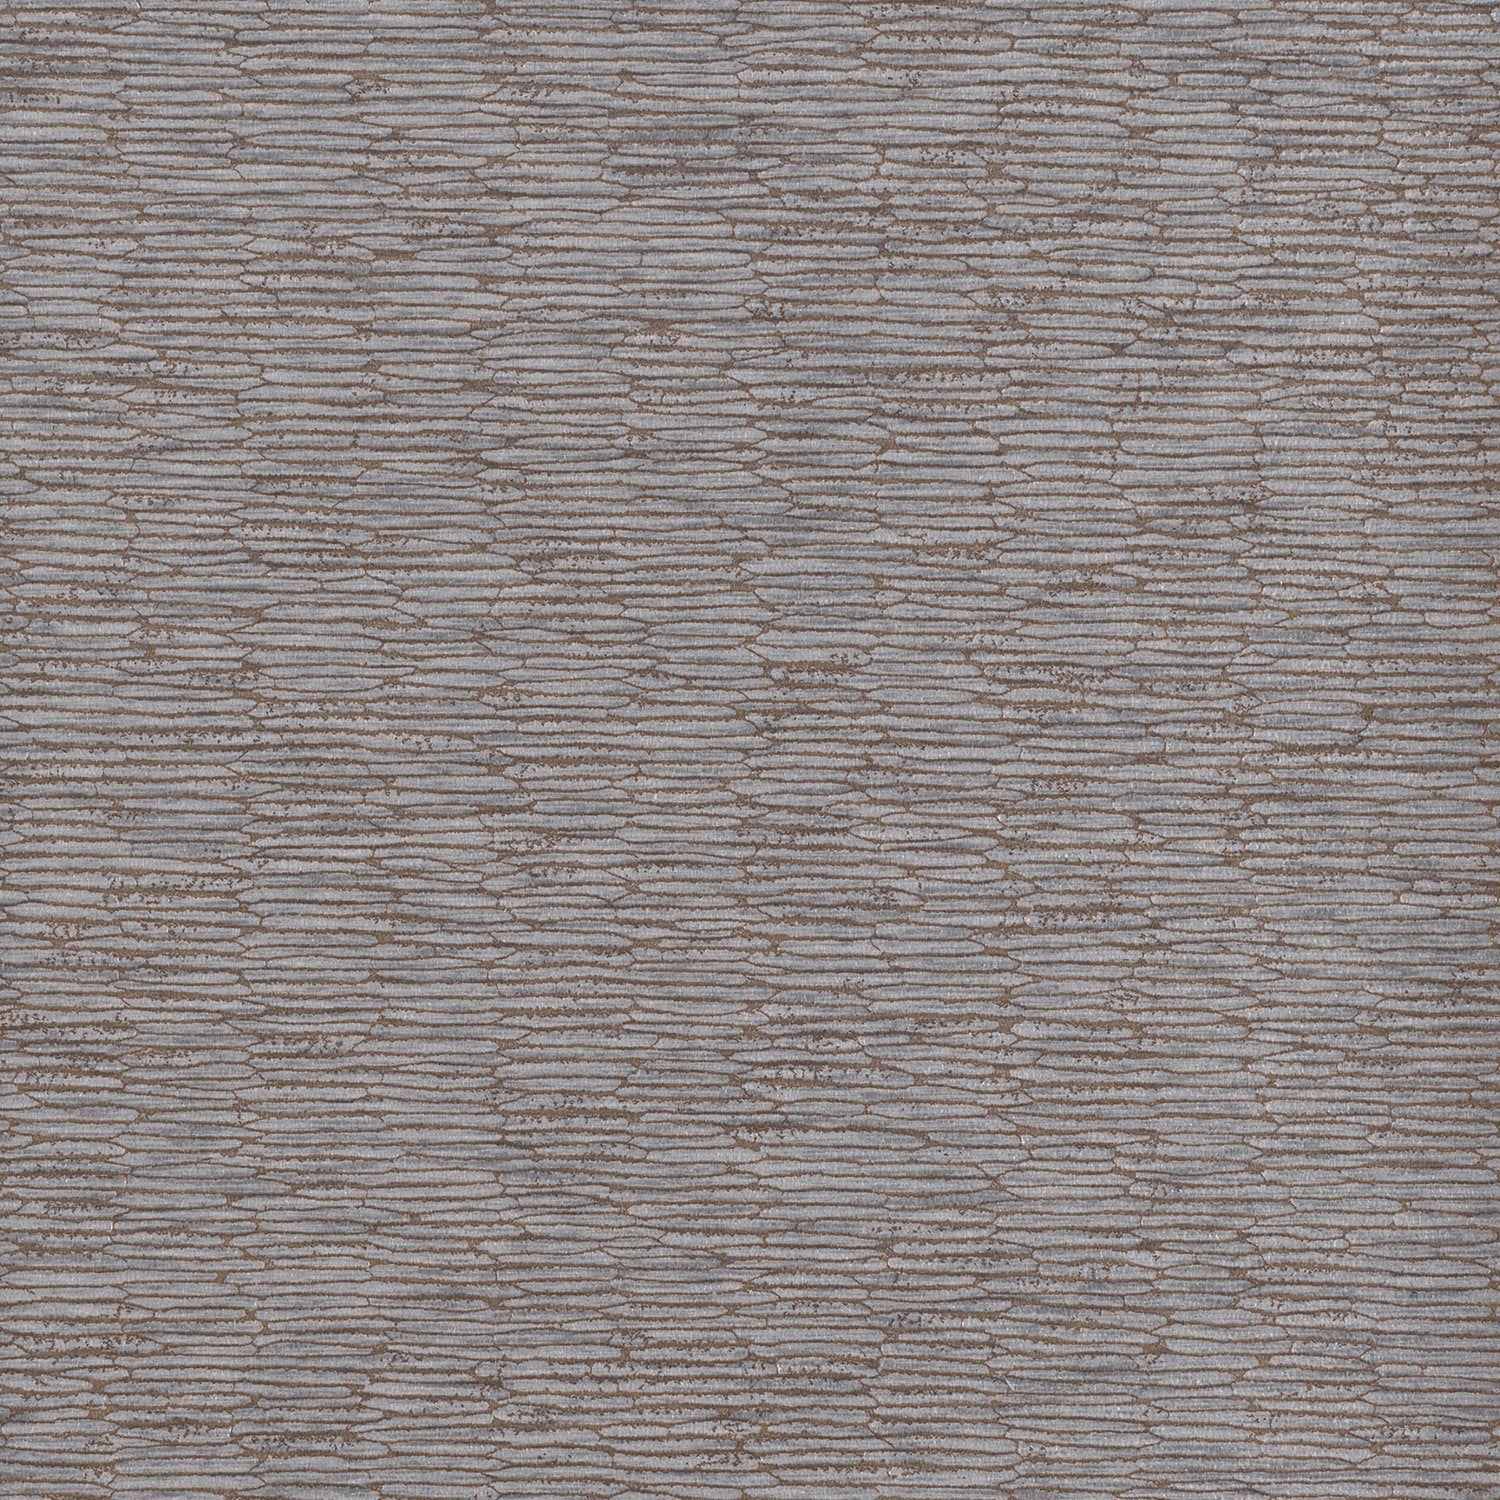 Chipper - Y46864 - Wallcovering - Vycon - Kube Contract